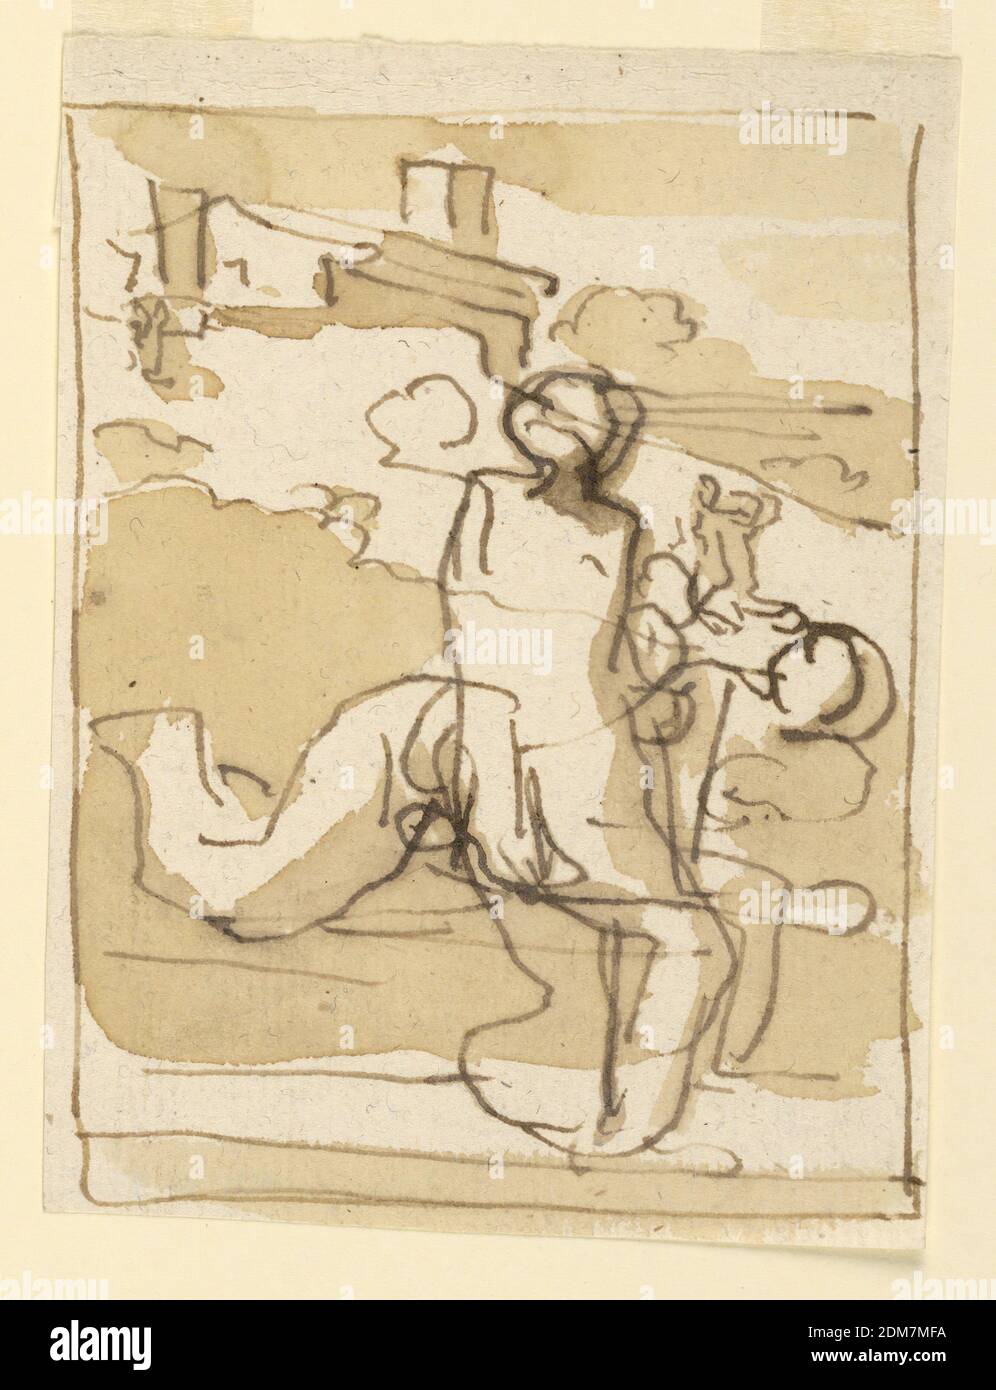 Sketch, Two Figures in Landscape with Architecture in Background, Fortunato Duranti, Italian, 1787 - 1863, Pen and ink, brush and sepia wash on paper, Sketch, Two Figures in Landscape with Architecture in Background, Rome, Italy, 1820–1850, Drawing Stock Photo